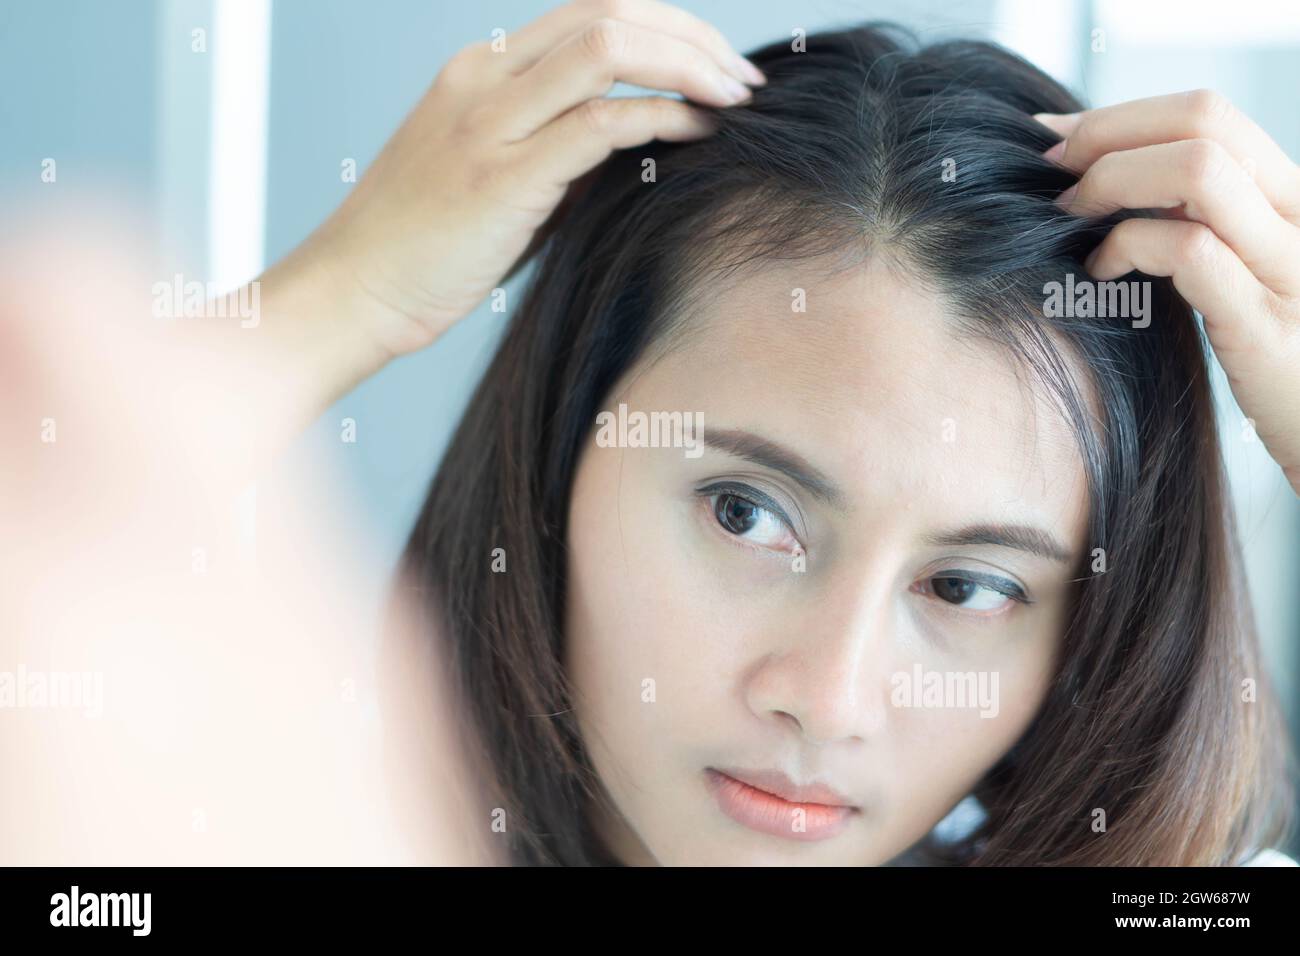 Reflection Of Woman Looking At Hair On Mirror Stock Photo